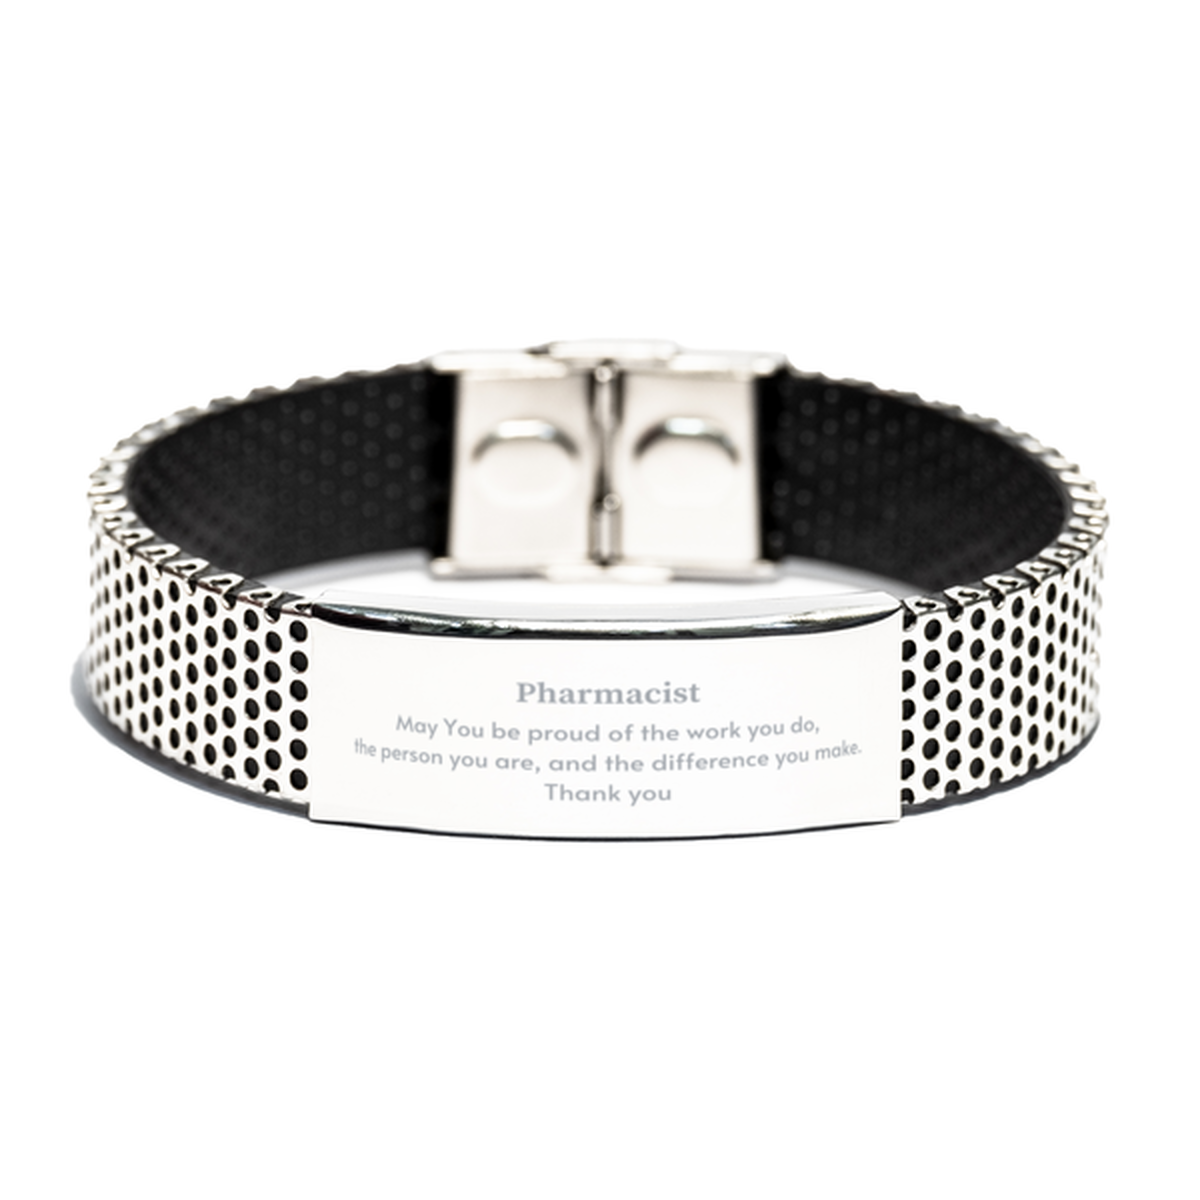 Heartwarming Stainless Steel Bracelet Retirement Coworkers Gifts for Pharmacist, Pharmacist May You be proud of the work you do, the person you are Gifts for Boss Men Women Friends